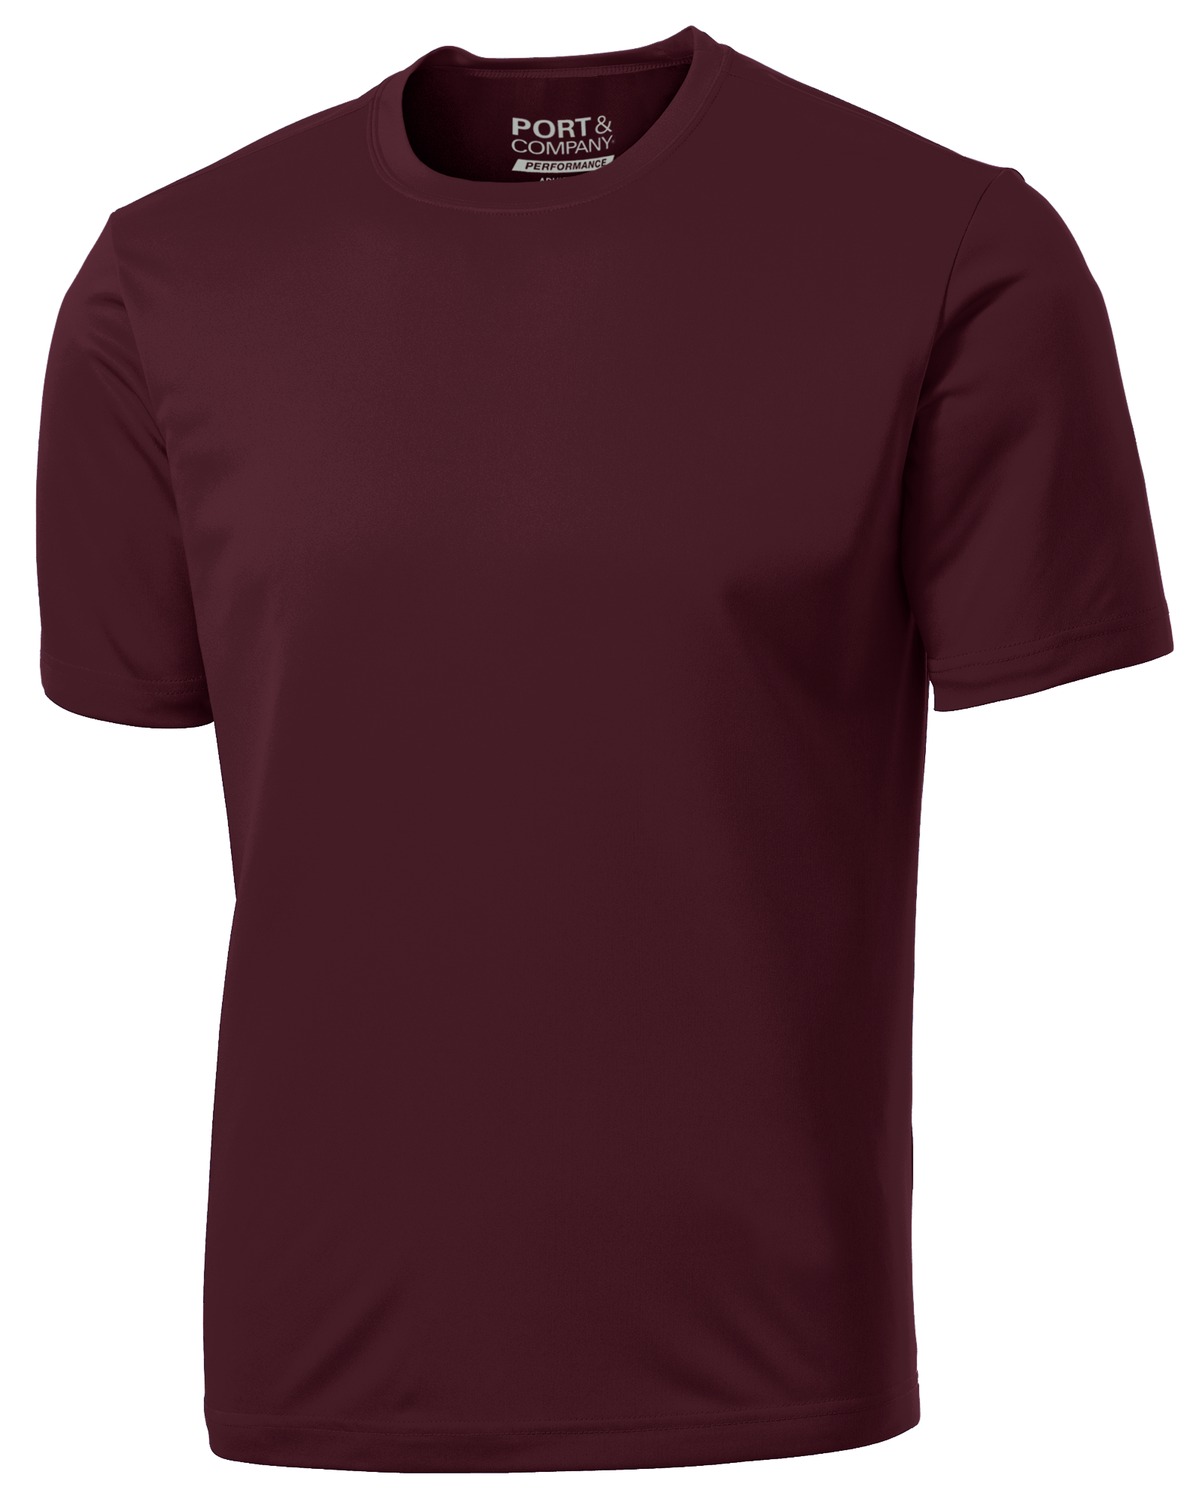 Port & Company ® Performance Tee PC380 Questions & Answers